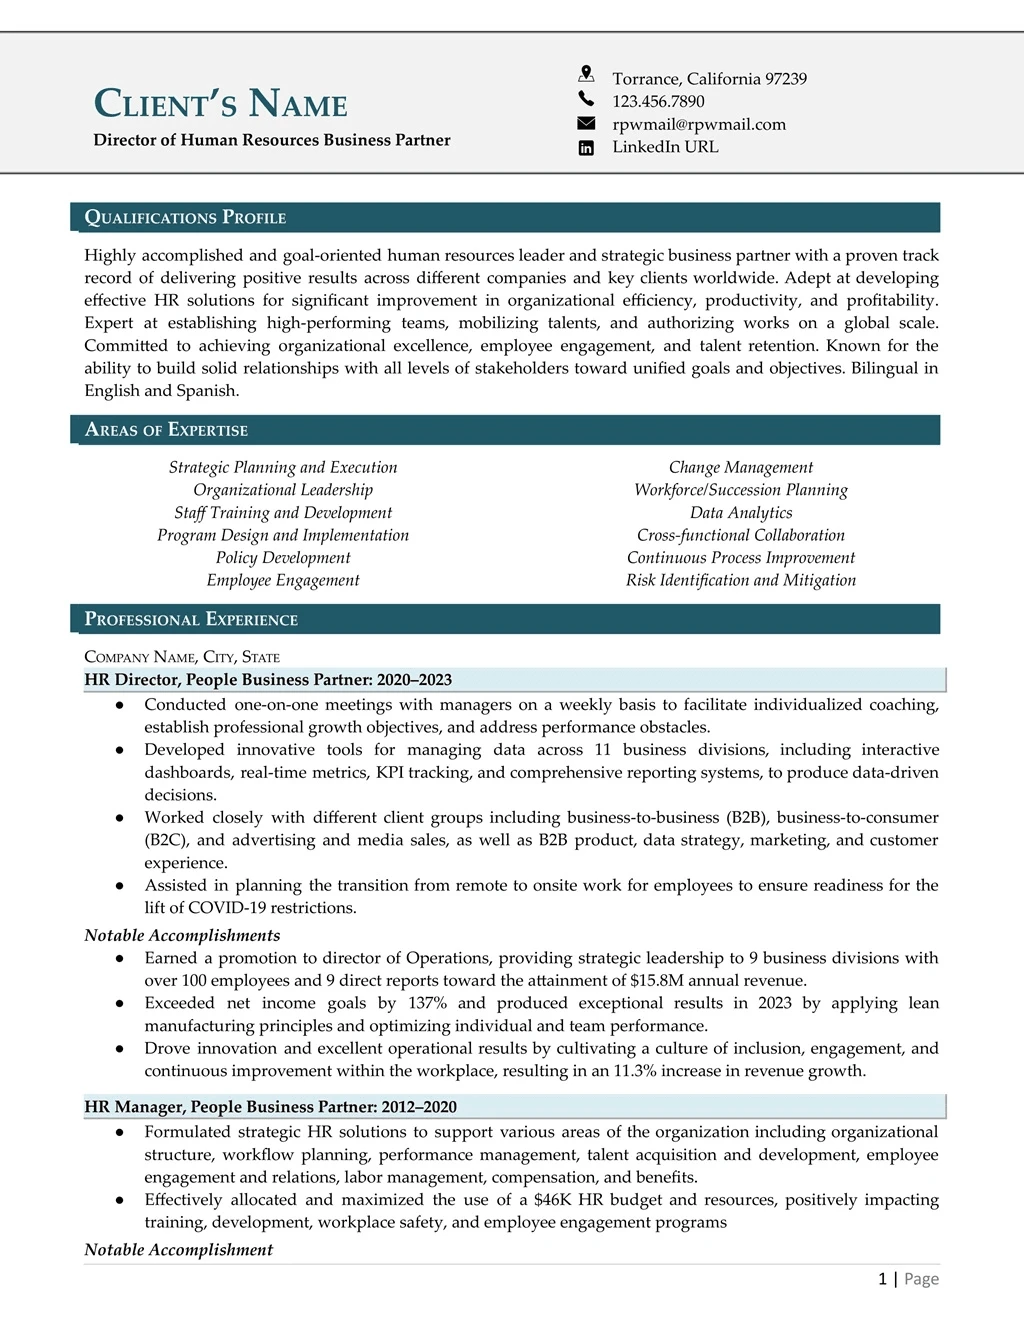 Human Resources Resume Example Page One